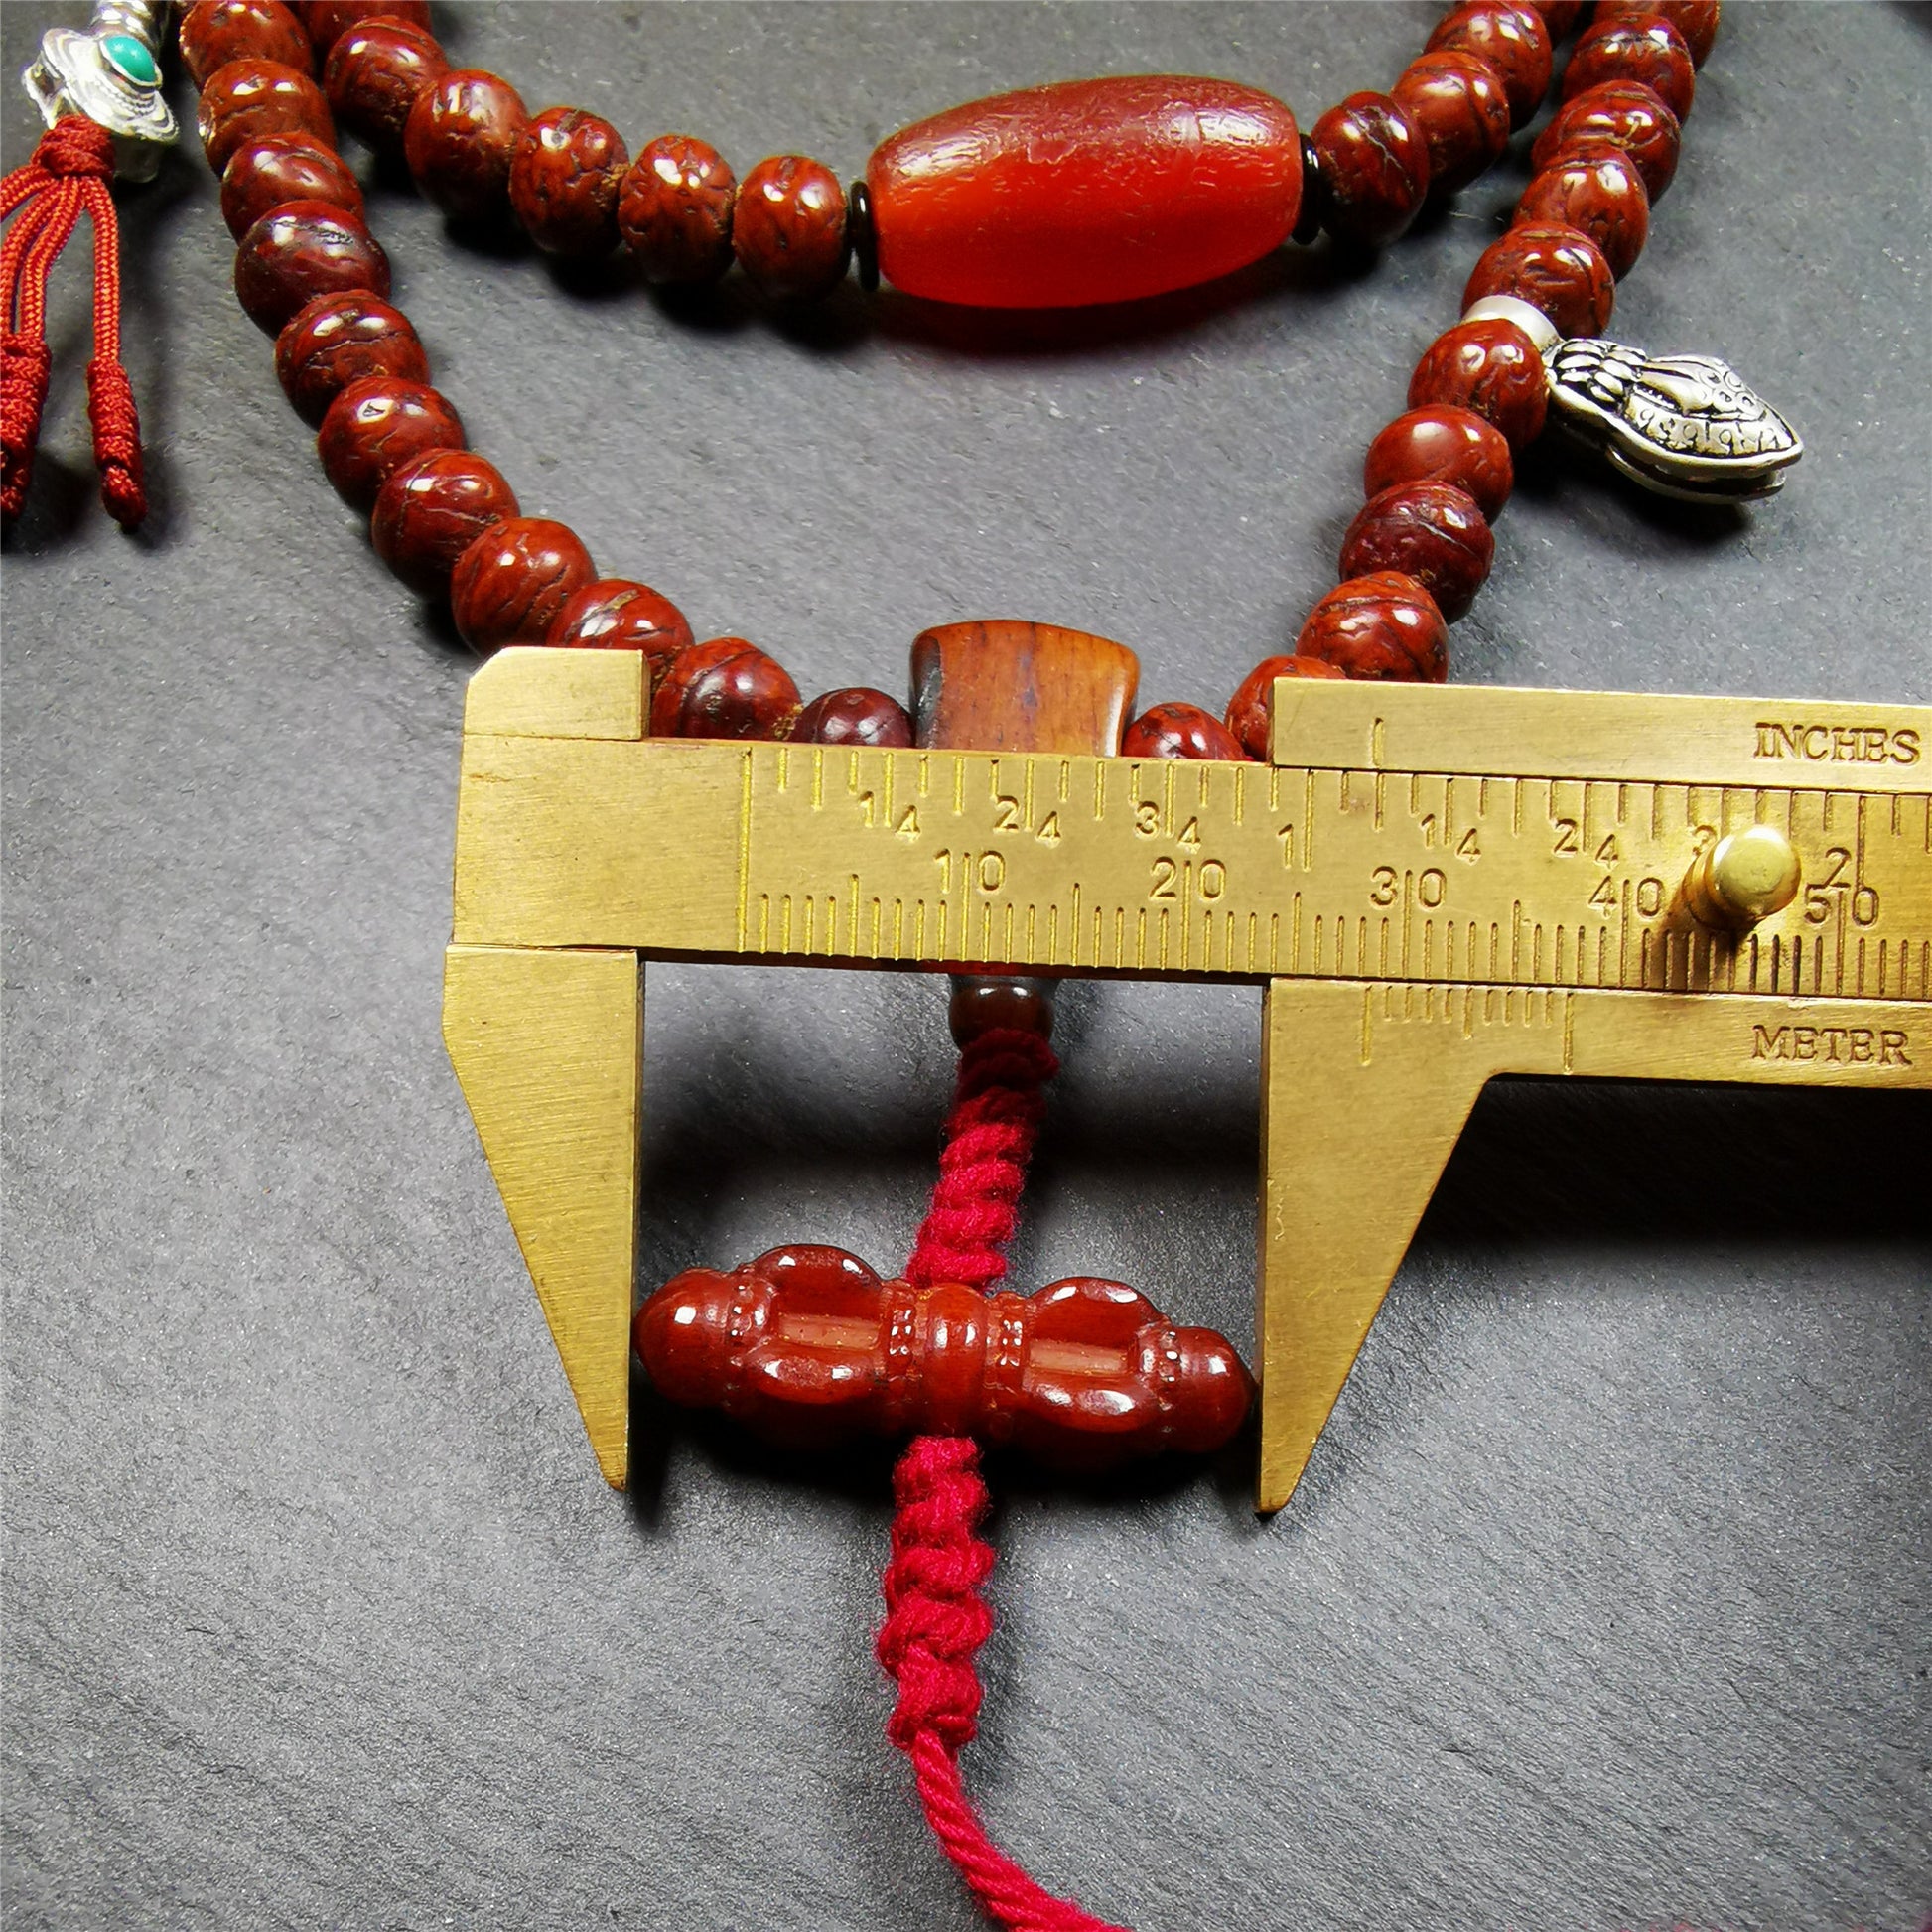 This bodhi beads mala is made by Tibetan craftsmen and come from Hepo Town, Baiyu County, the birthplace of the famous Tibetan handicrafts,about 30 years old, hold and blessed by a lama in Baiyu Monastery.  It is composed of 108 bodhi seed beads, and is equipped with 3 agate beads, silver bead counters are installed on both sides, 1 mani jewel bead clip,and finally consists a bone guru bead and vajra on the end, very elegant.